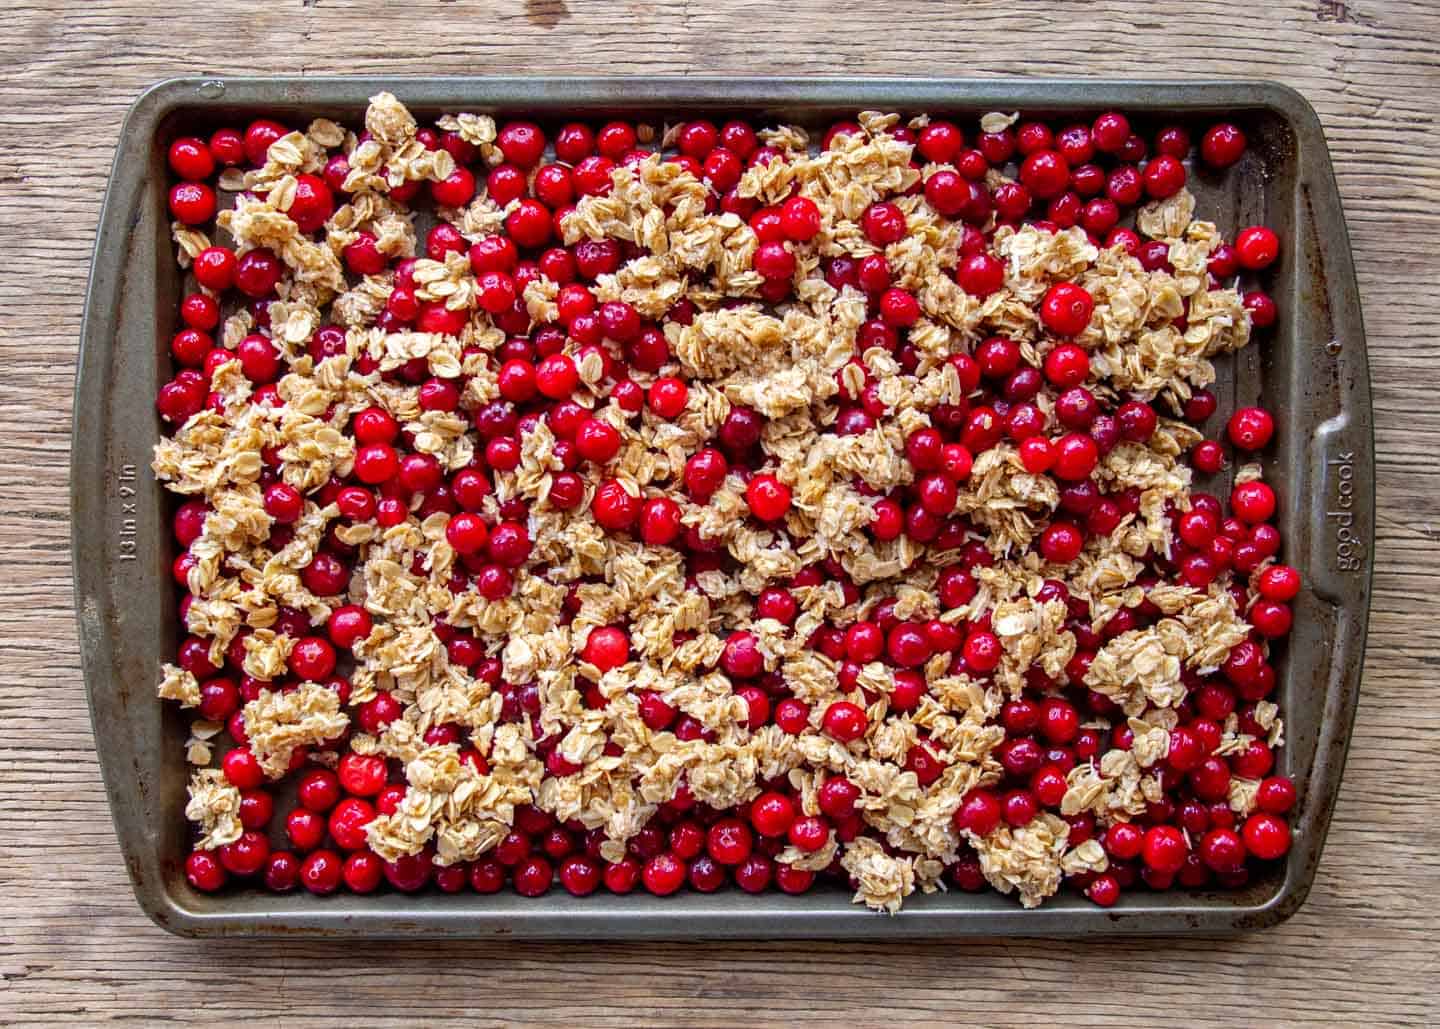 Add the mixed crisp toppings to the cranberries